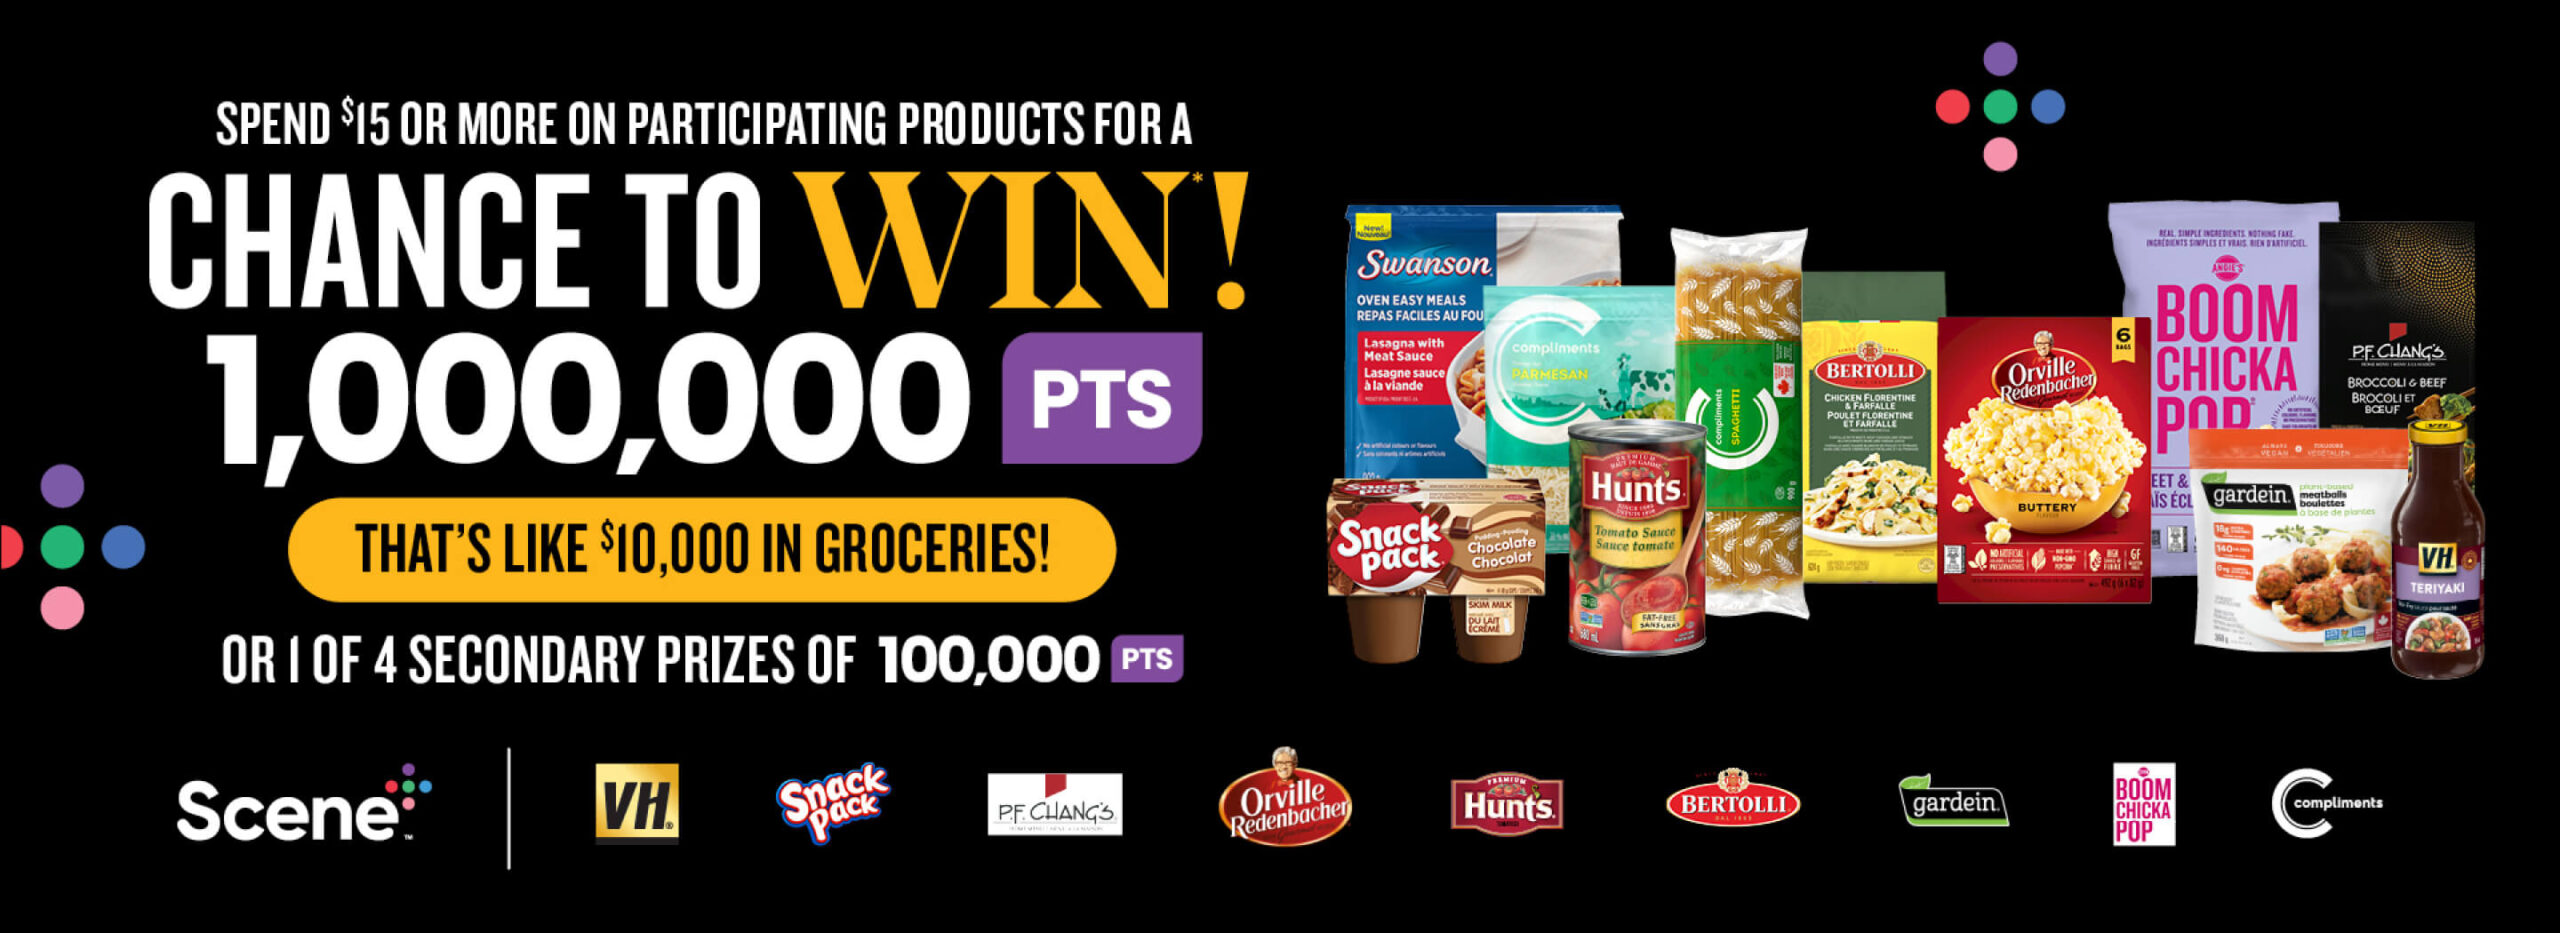 Conagra Foods Sweepstakes Contest: Chance to win 1 million Scene+ points